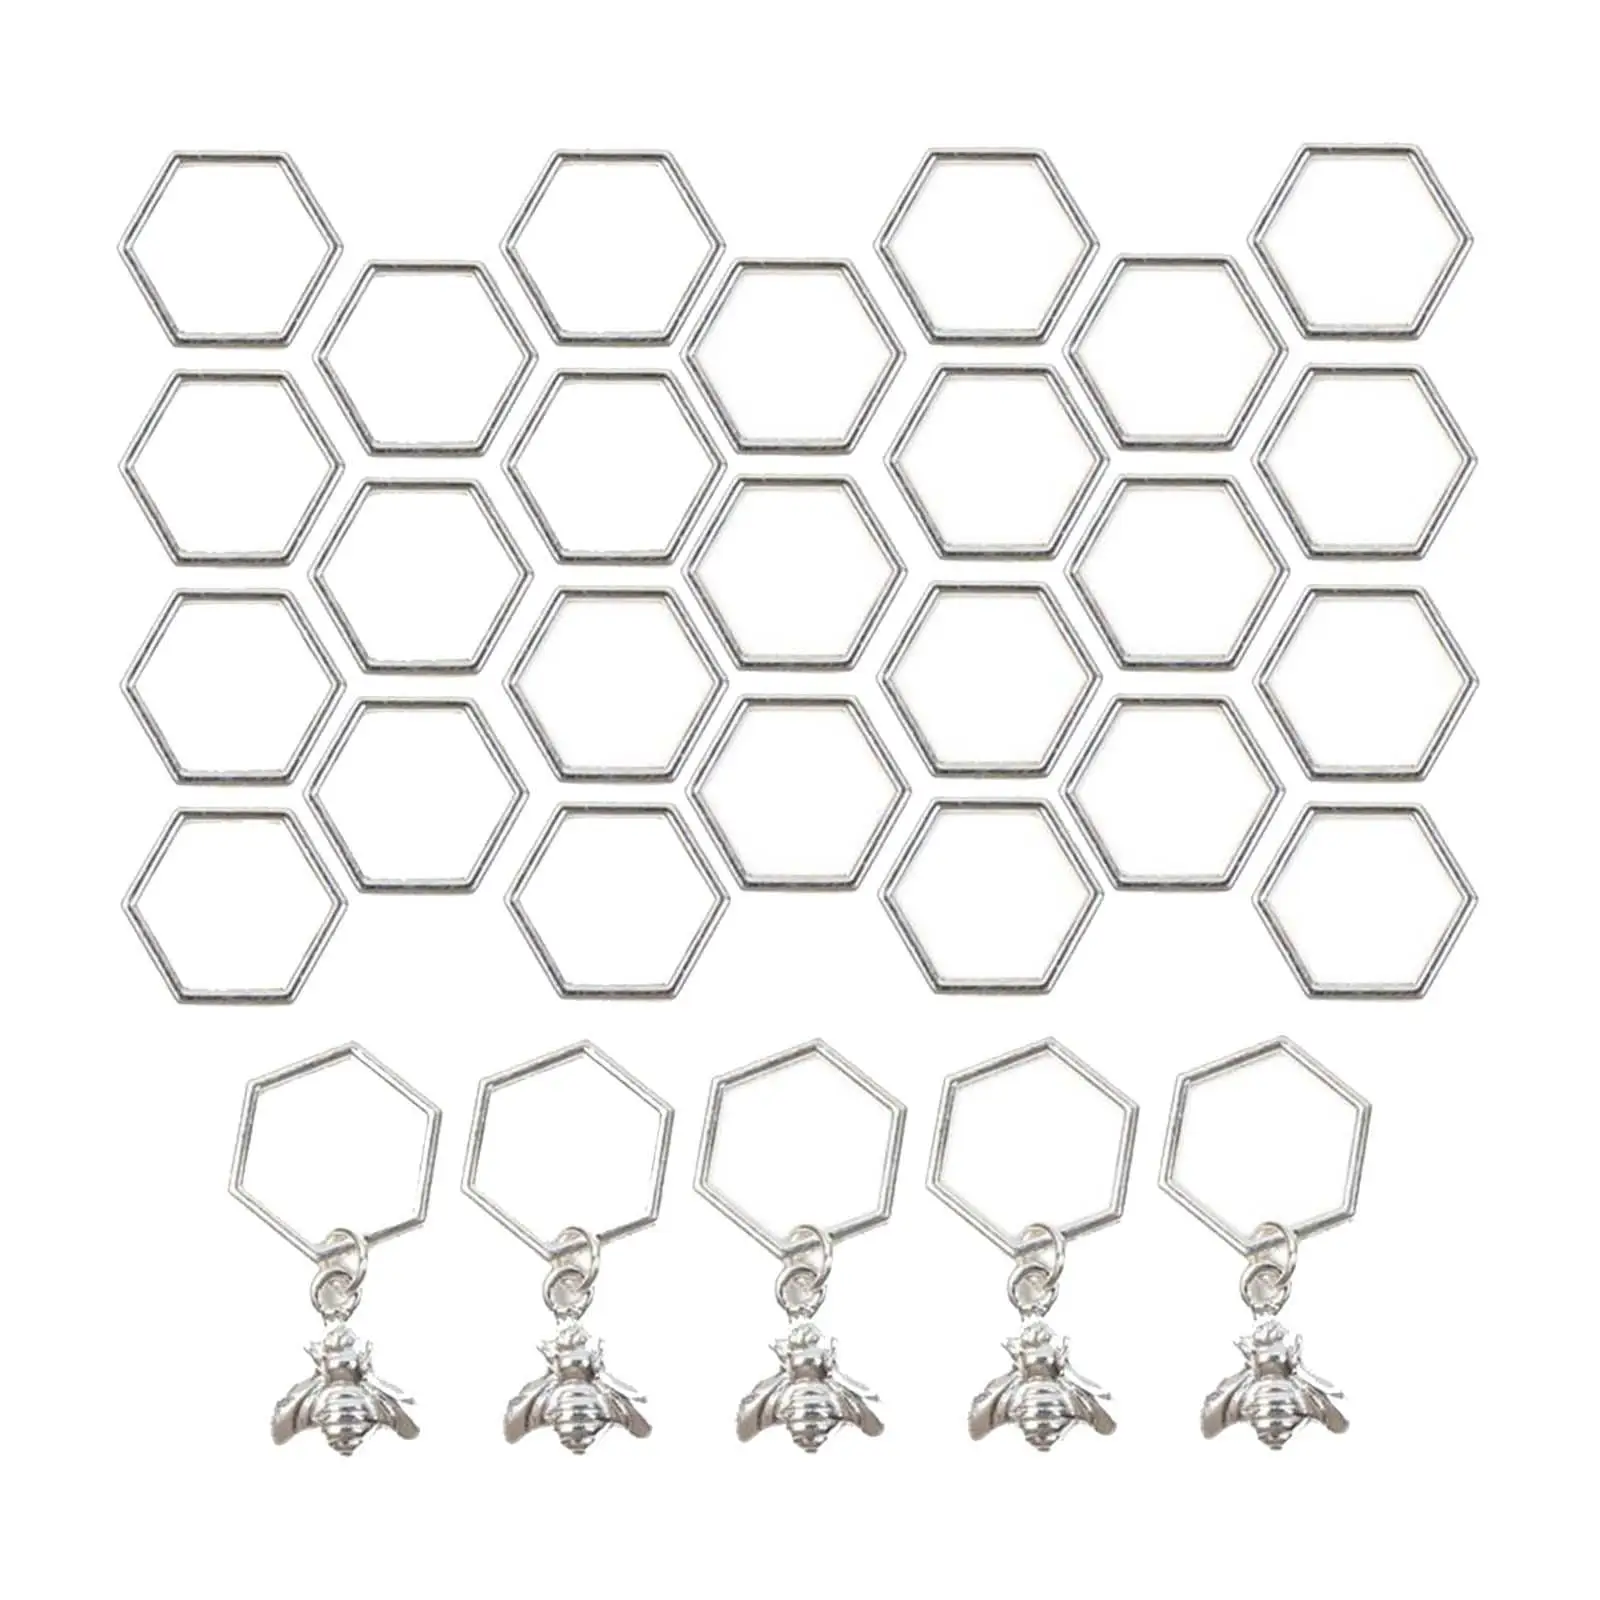 Stitch Markers Hexagon Smooth Zinc Alloy Stitch Needle Clip 30 Pack Protectors